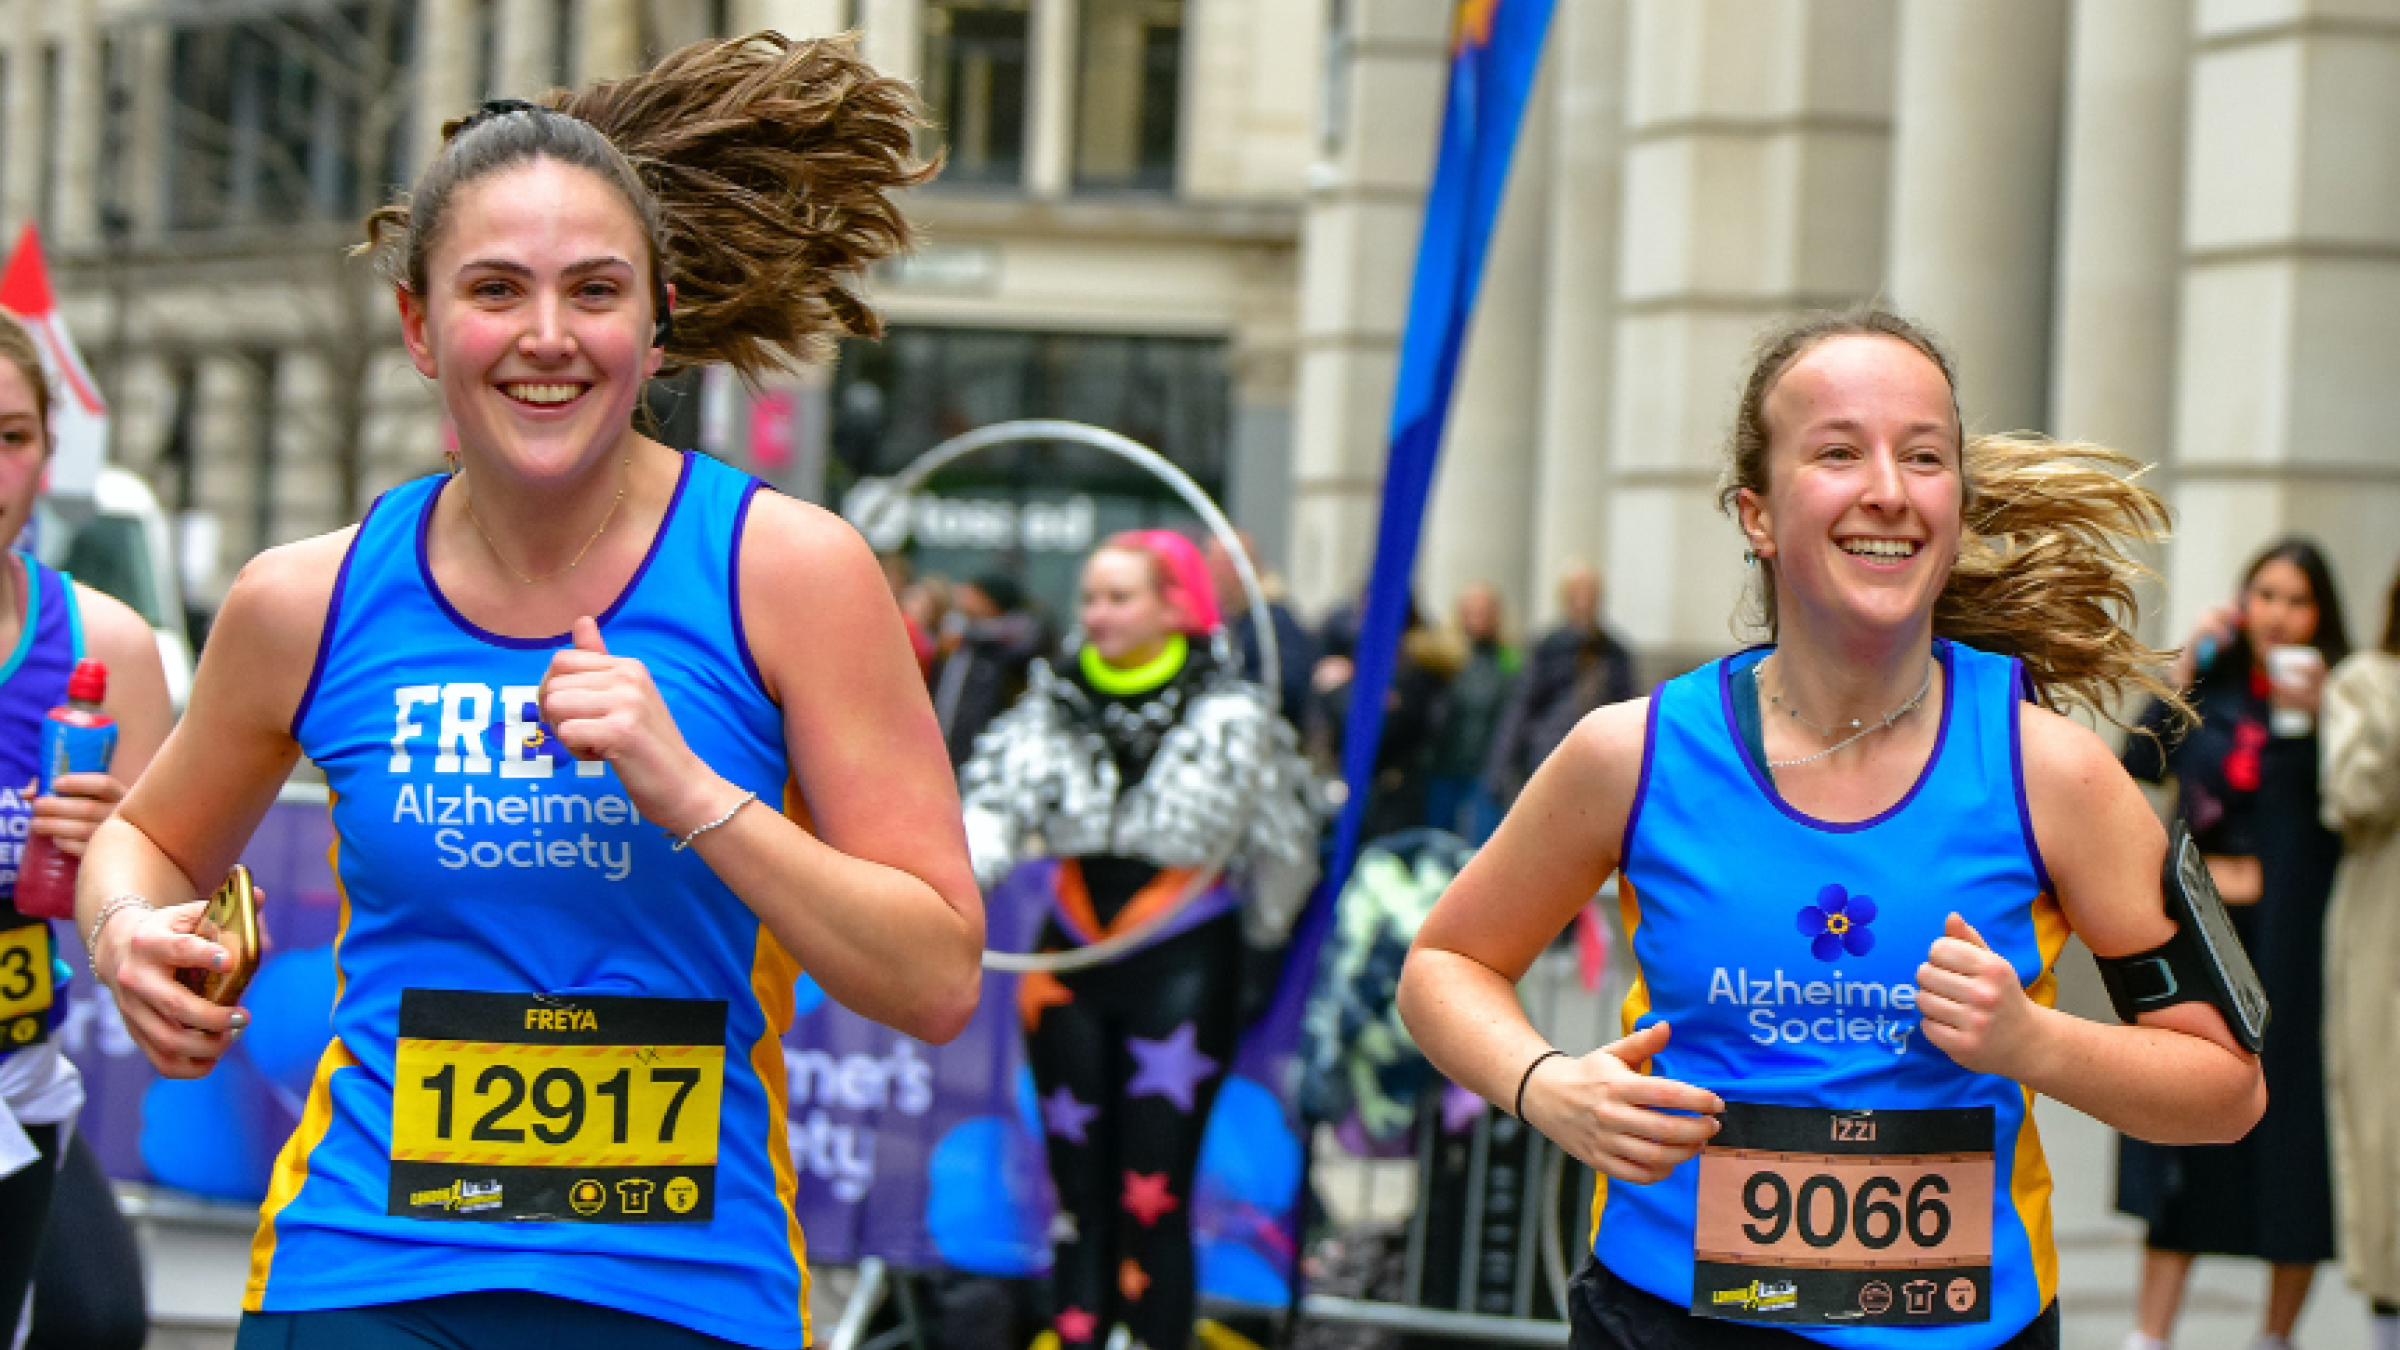 Two runners smiling